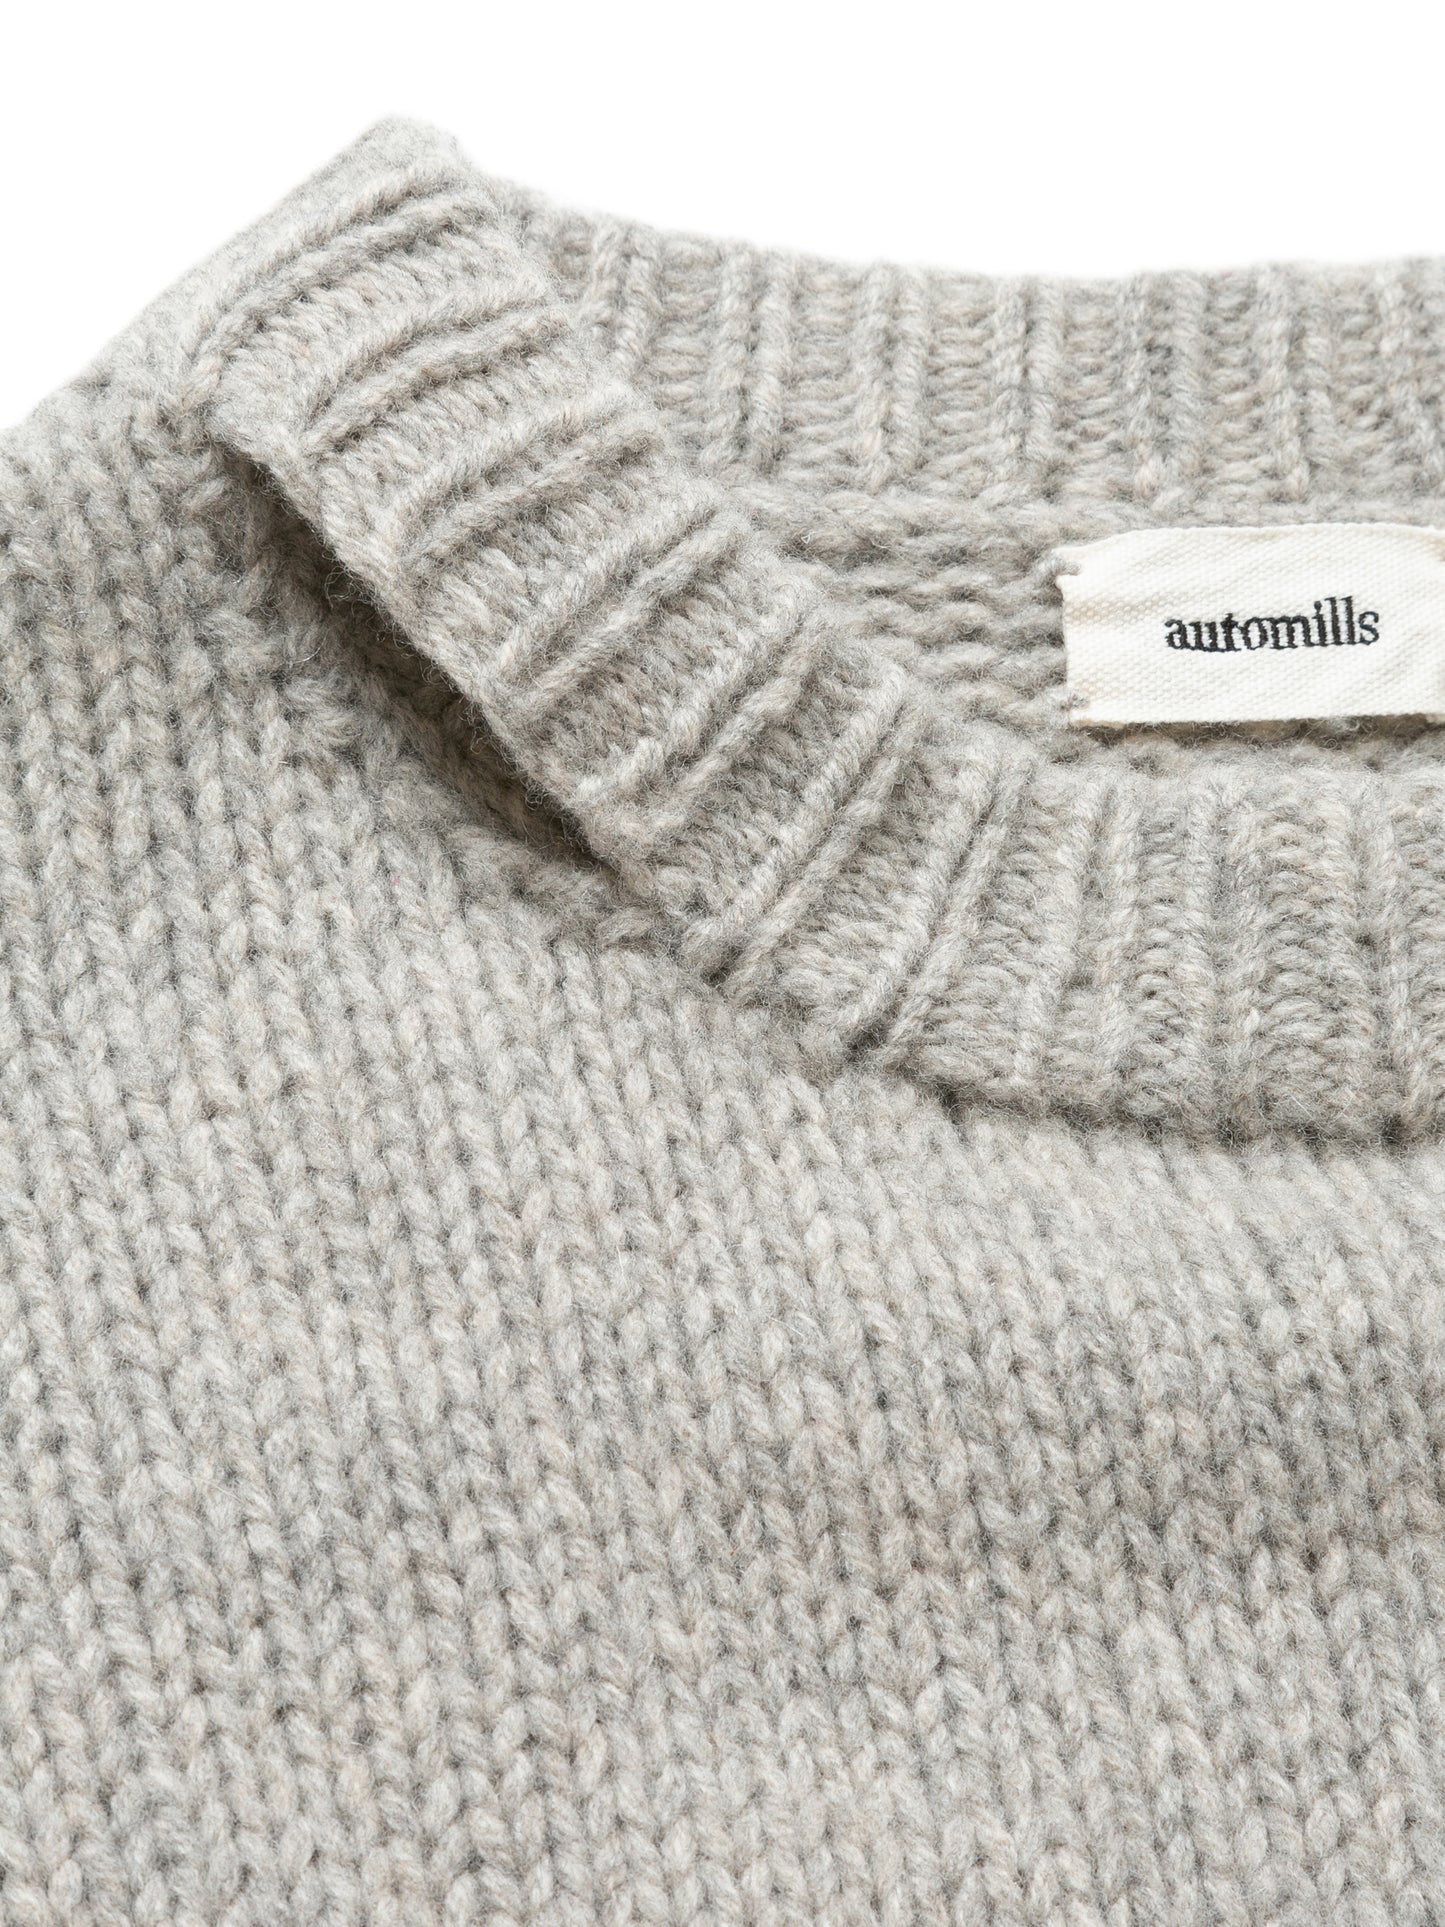 NOMADS SWEATER  HAND MADE WOOL KNIT AM-K0112 Gray